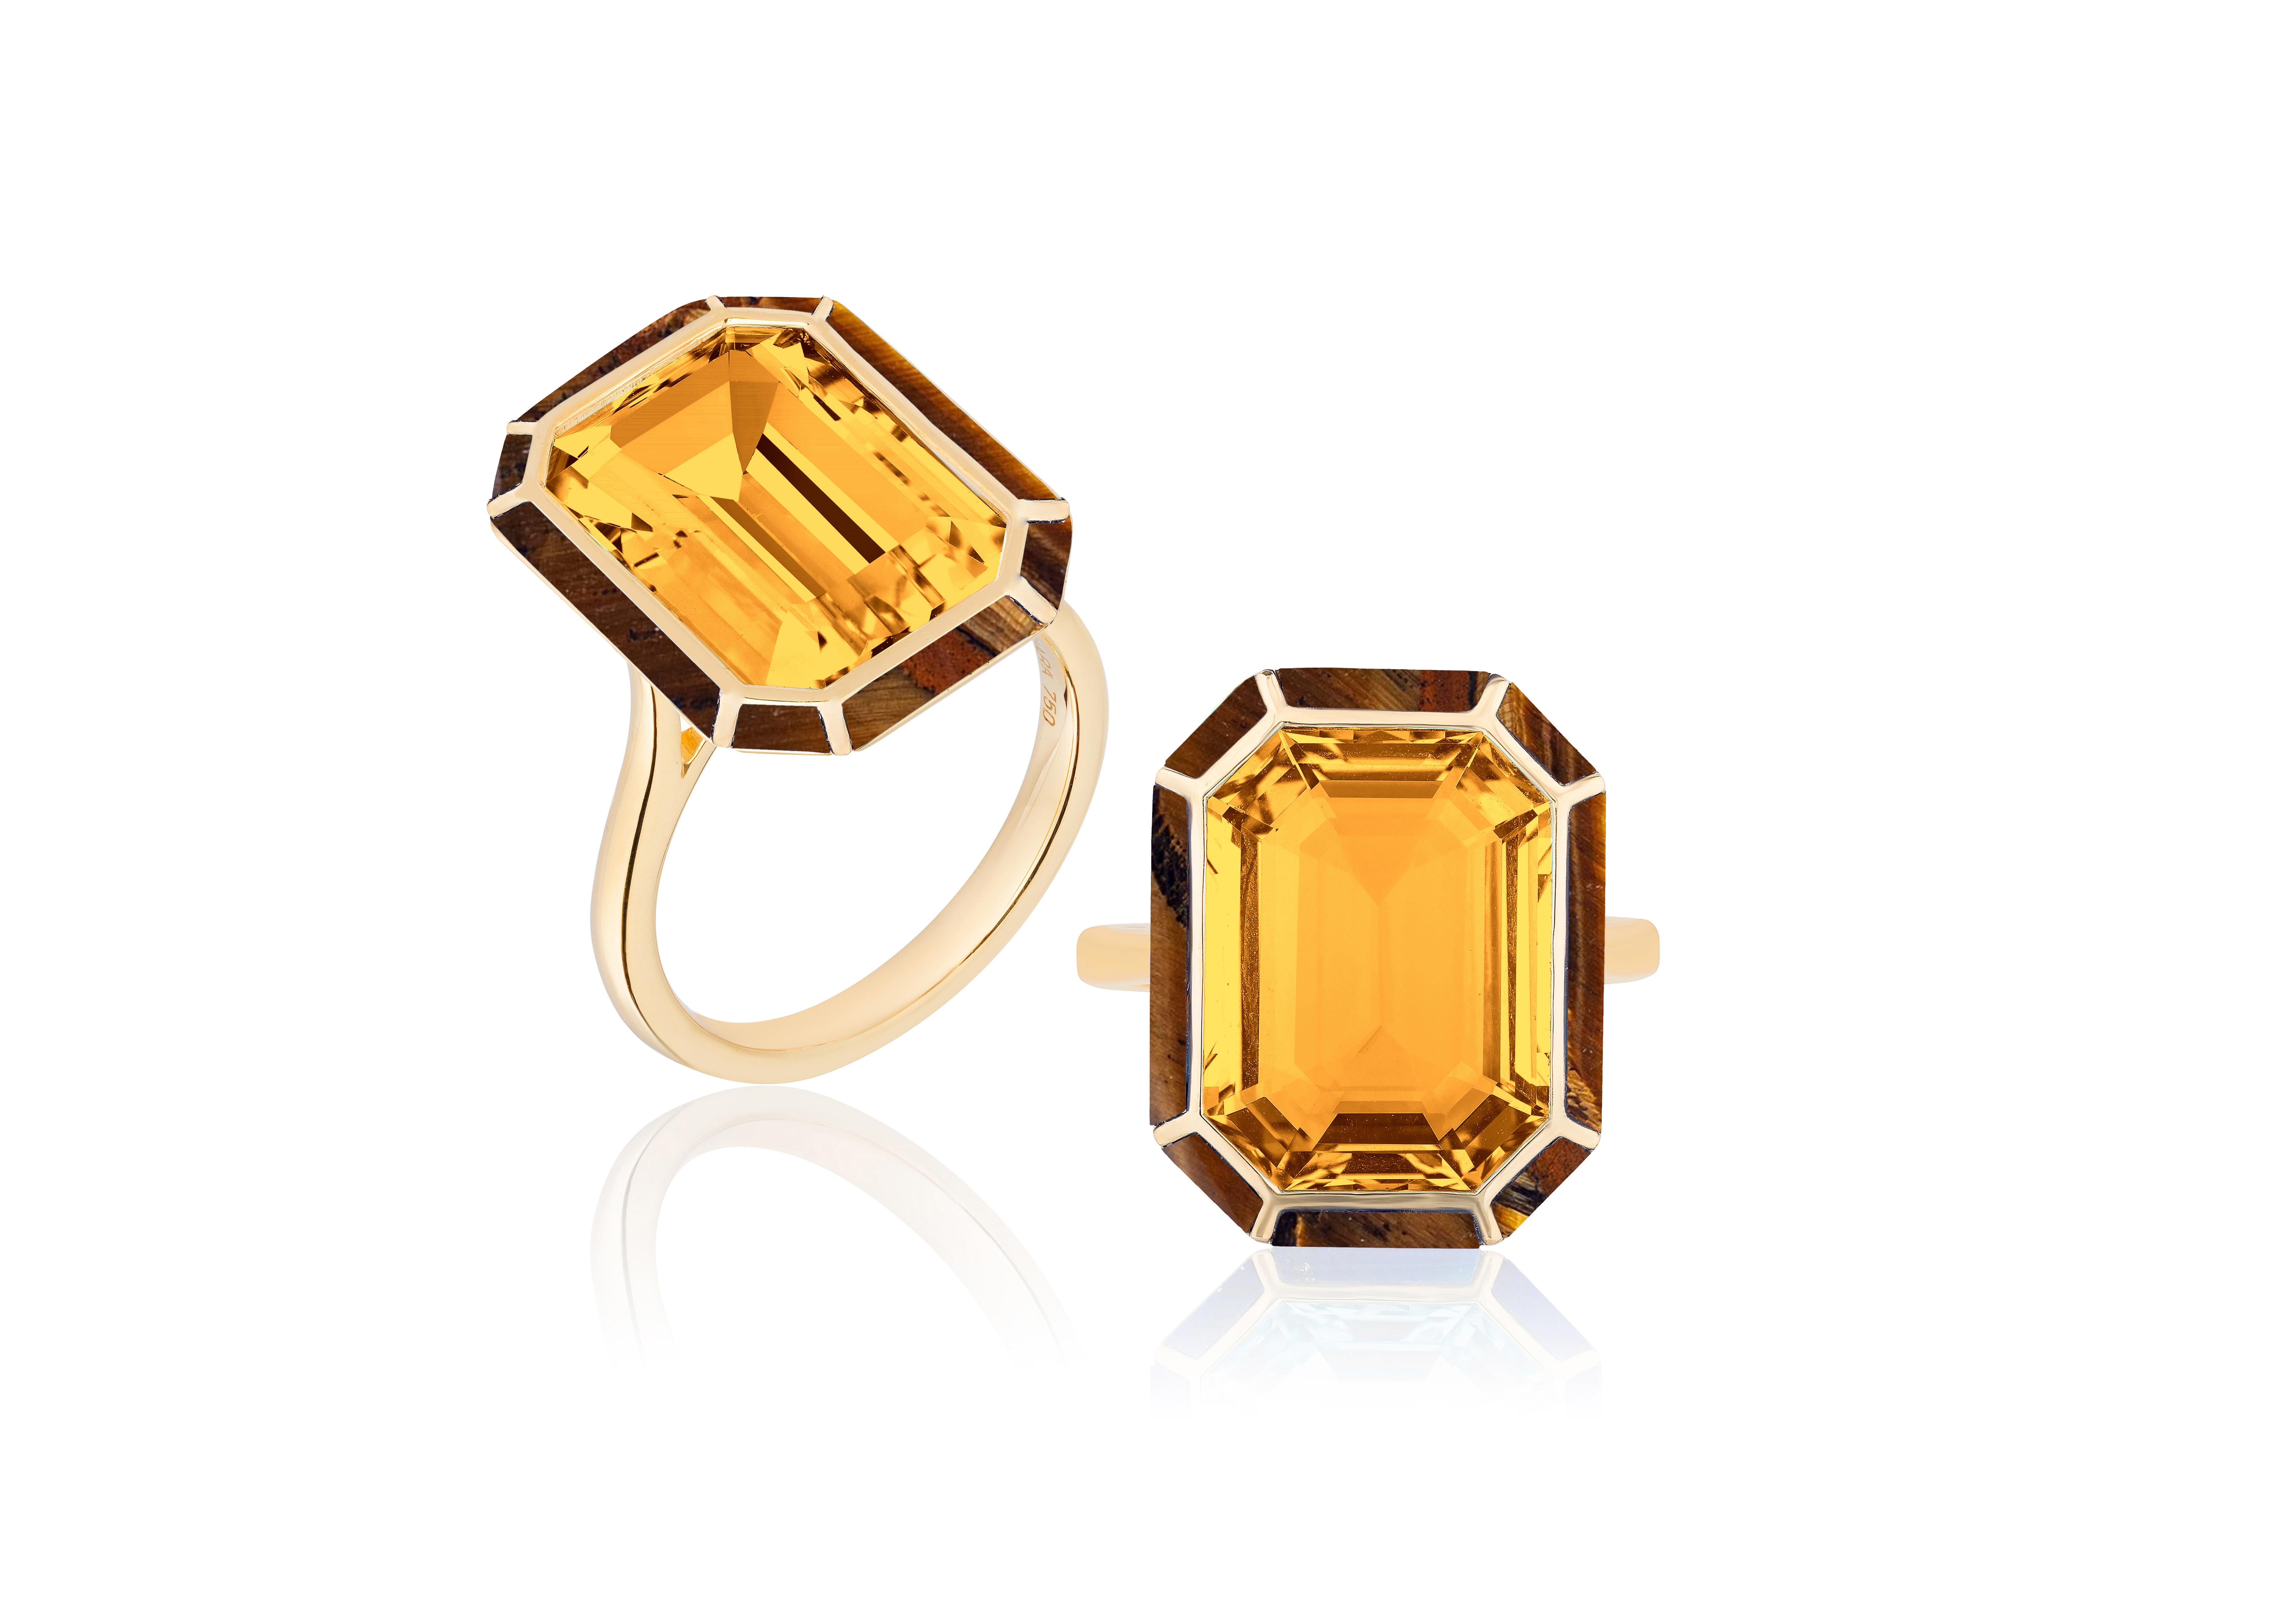 This Citrine and Tiger's Eye Emerald Cut Ring from the 'Mélange' Collection is a stunning piece of jewelry made from 18K yellow gold. The ring features a unique combination of citrine and tiger's eye gemstones in an emerald cut, which creates a